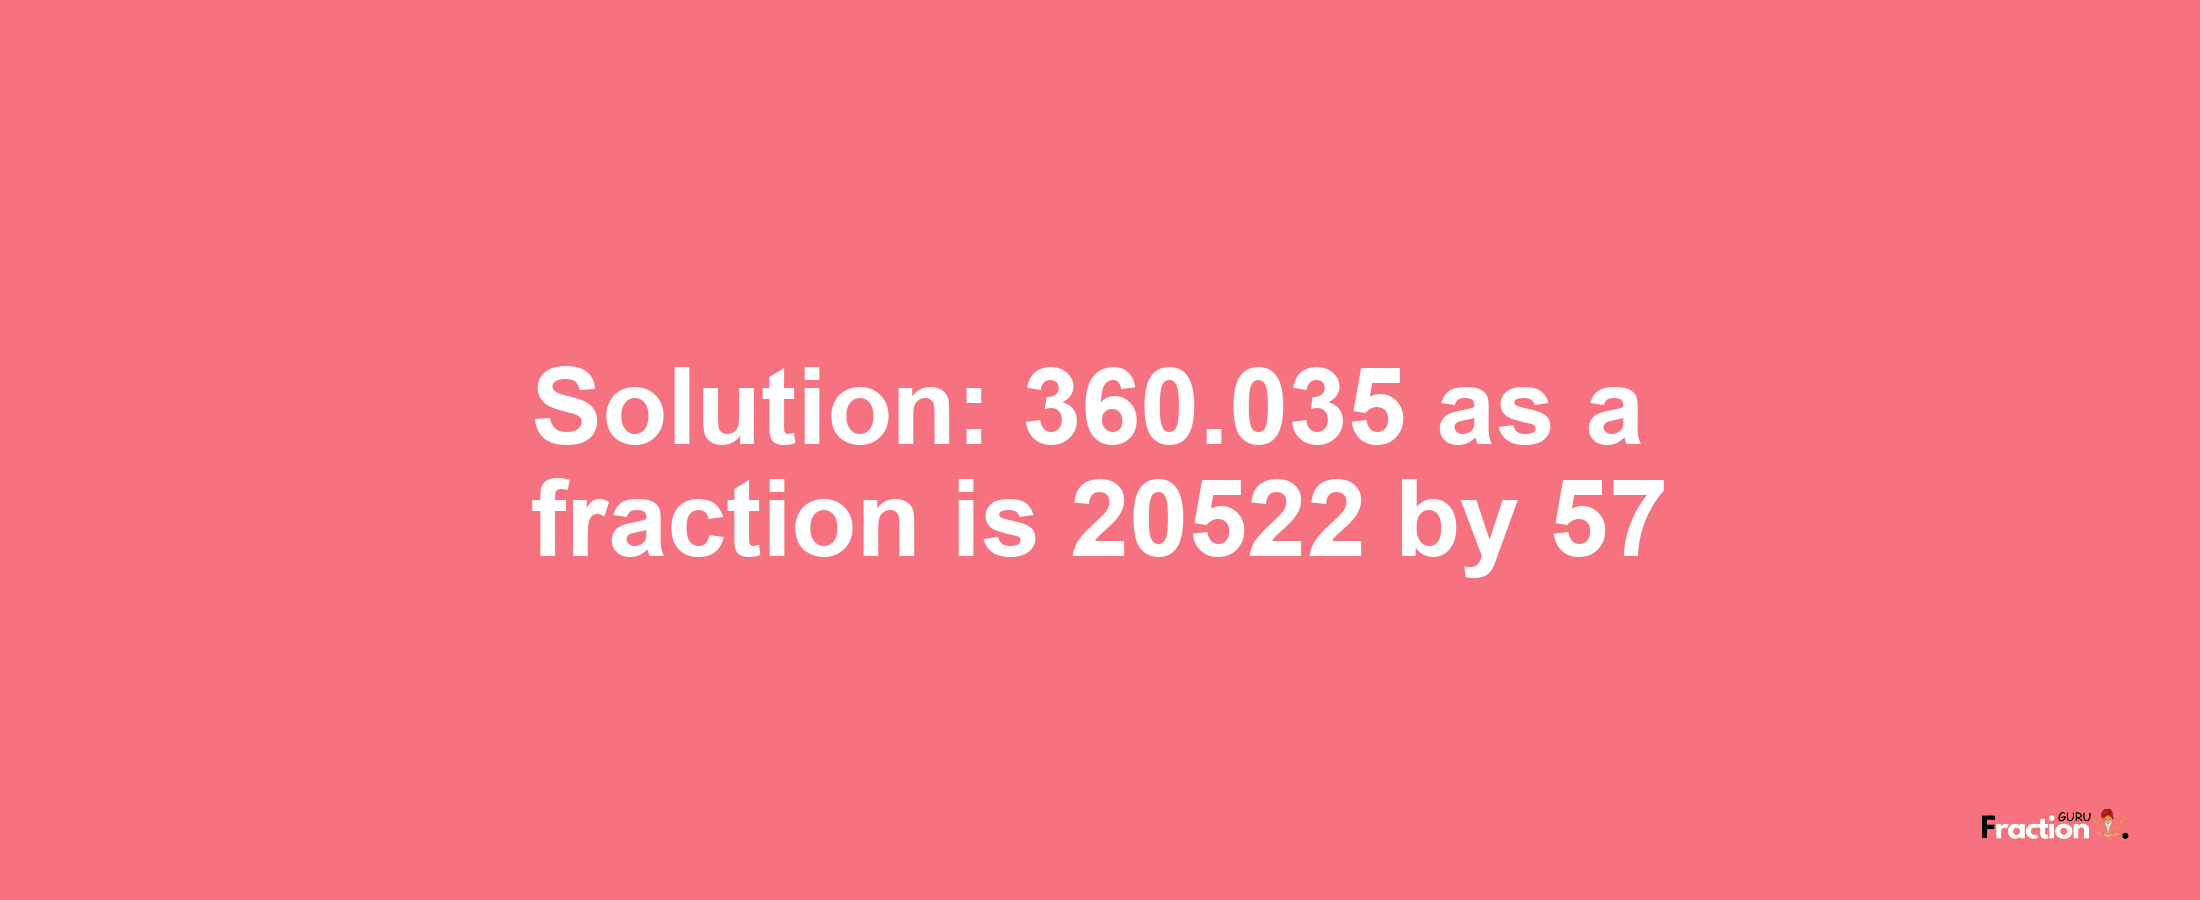 Solution:360.035 as a fraction is 20522/57